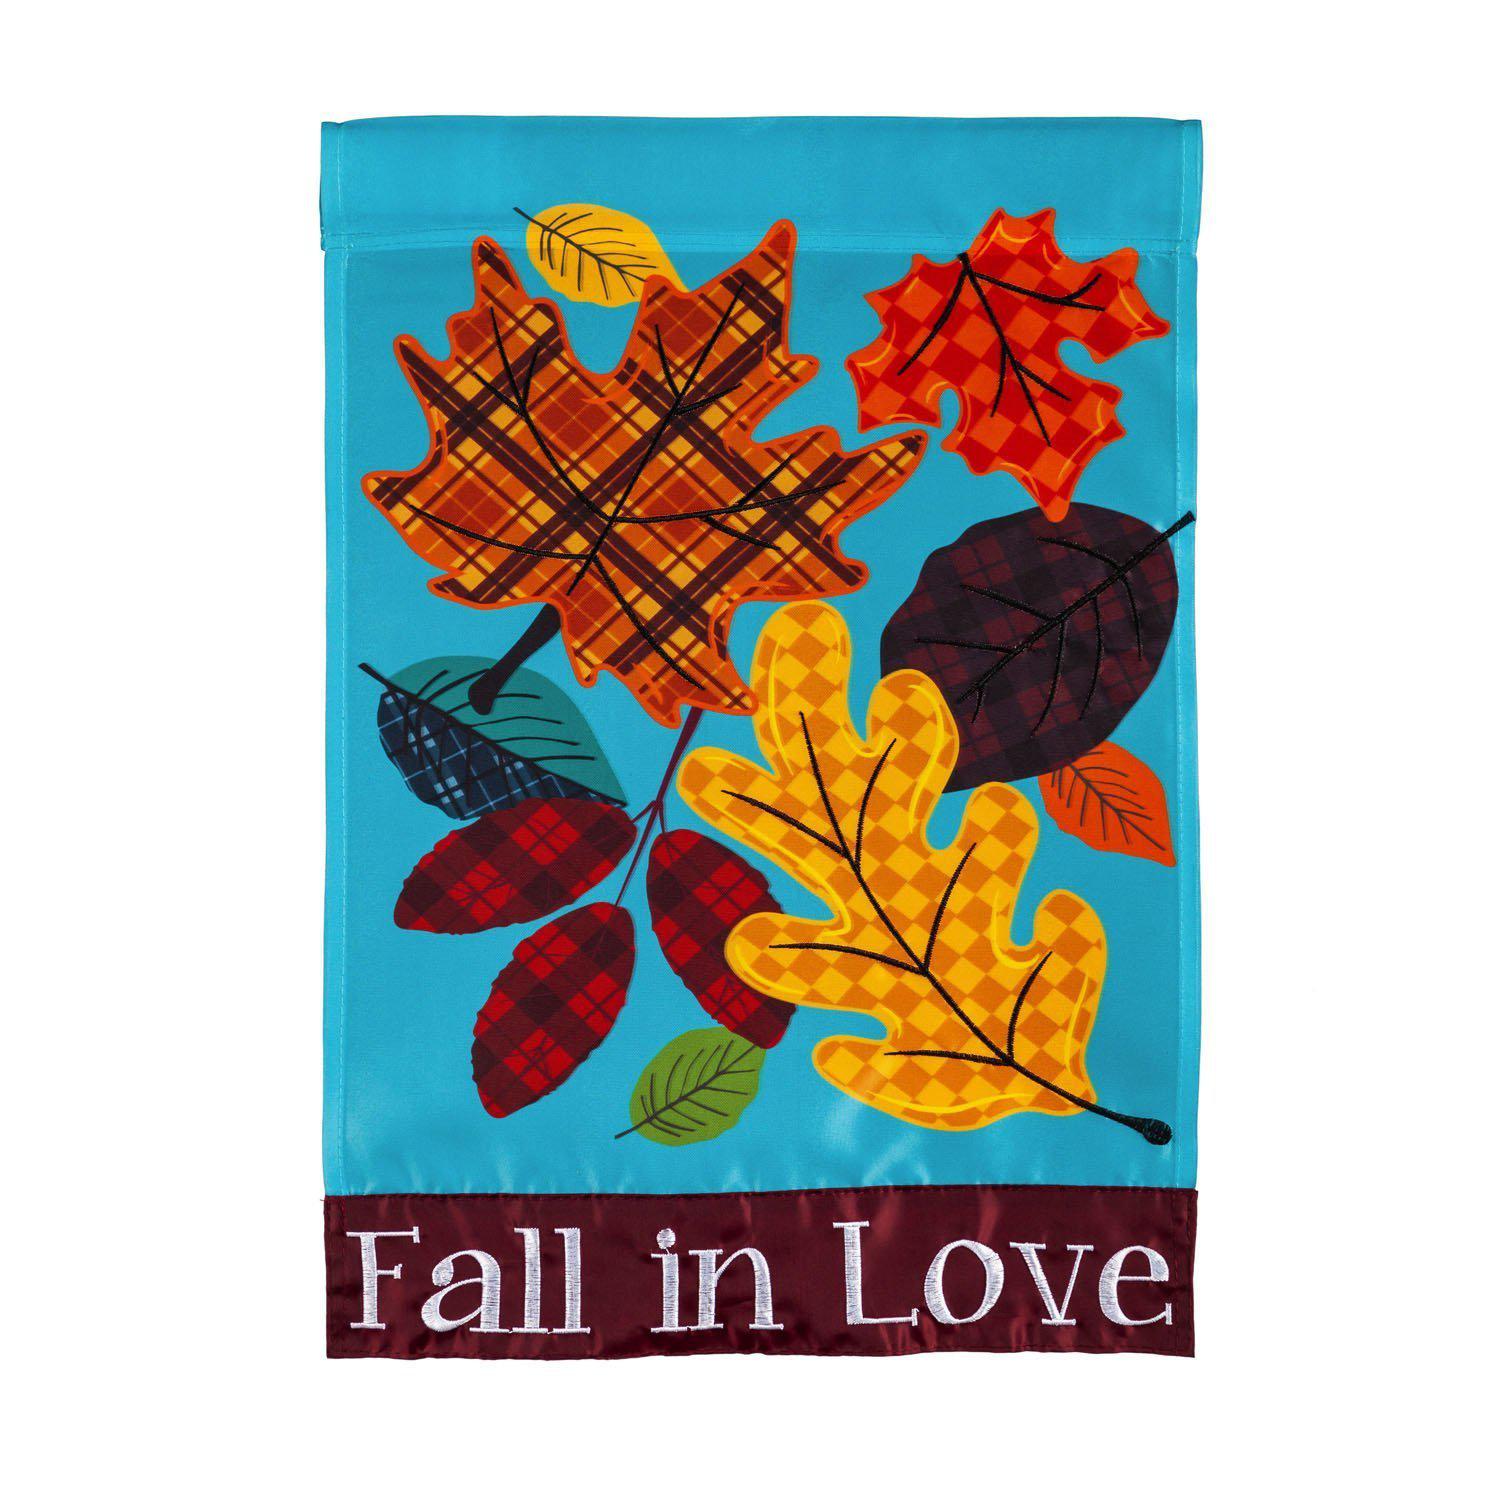 The Fall in Love Plaid Leaves garden flag features an array of patterned, brightly colored fall leaves along with the words "Fall in Love".